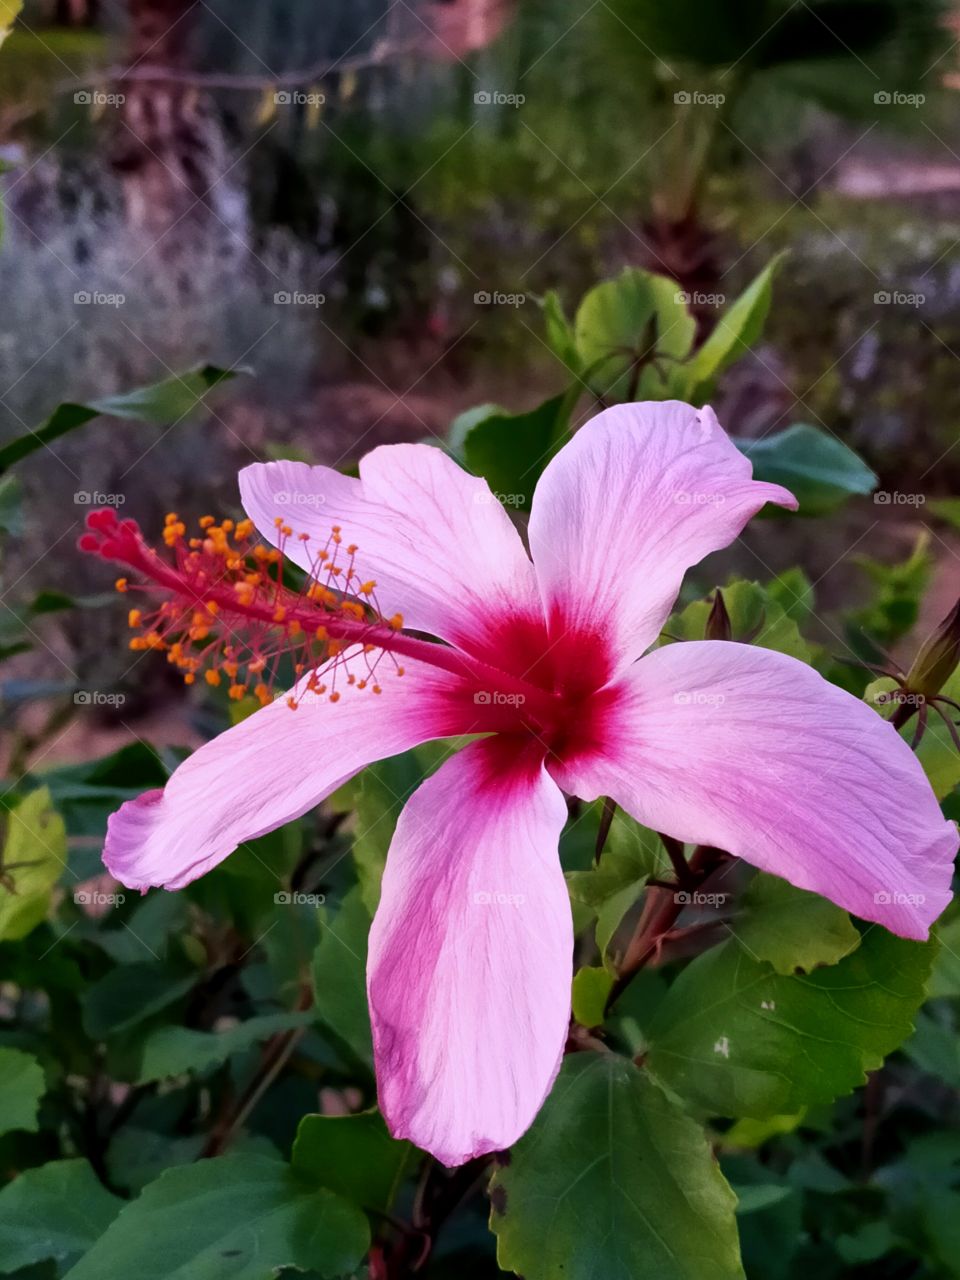 I took this photo of this beautiful flower in the school where I teach...It attracted my attention and decided to take a photo of it...